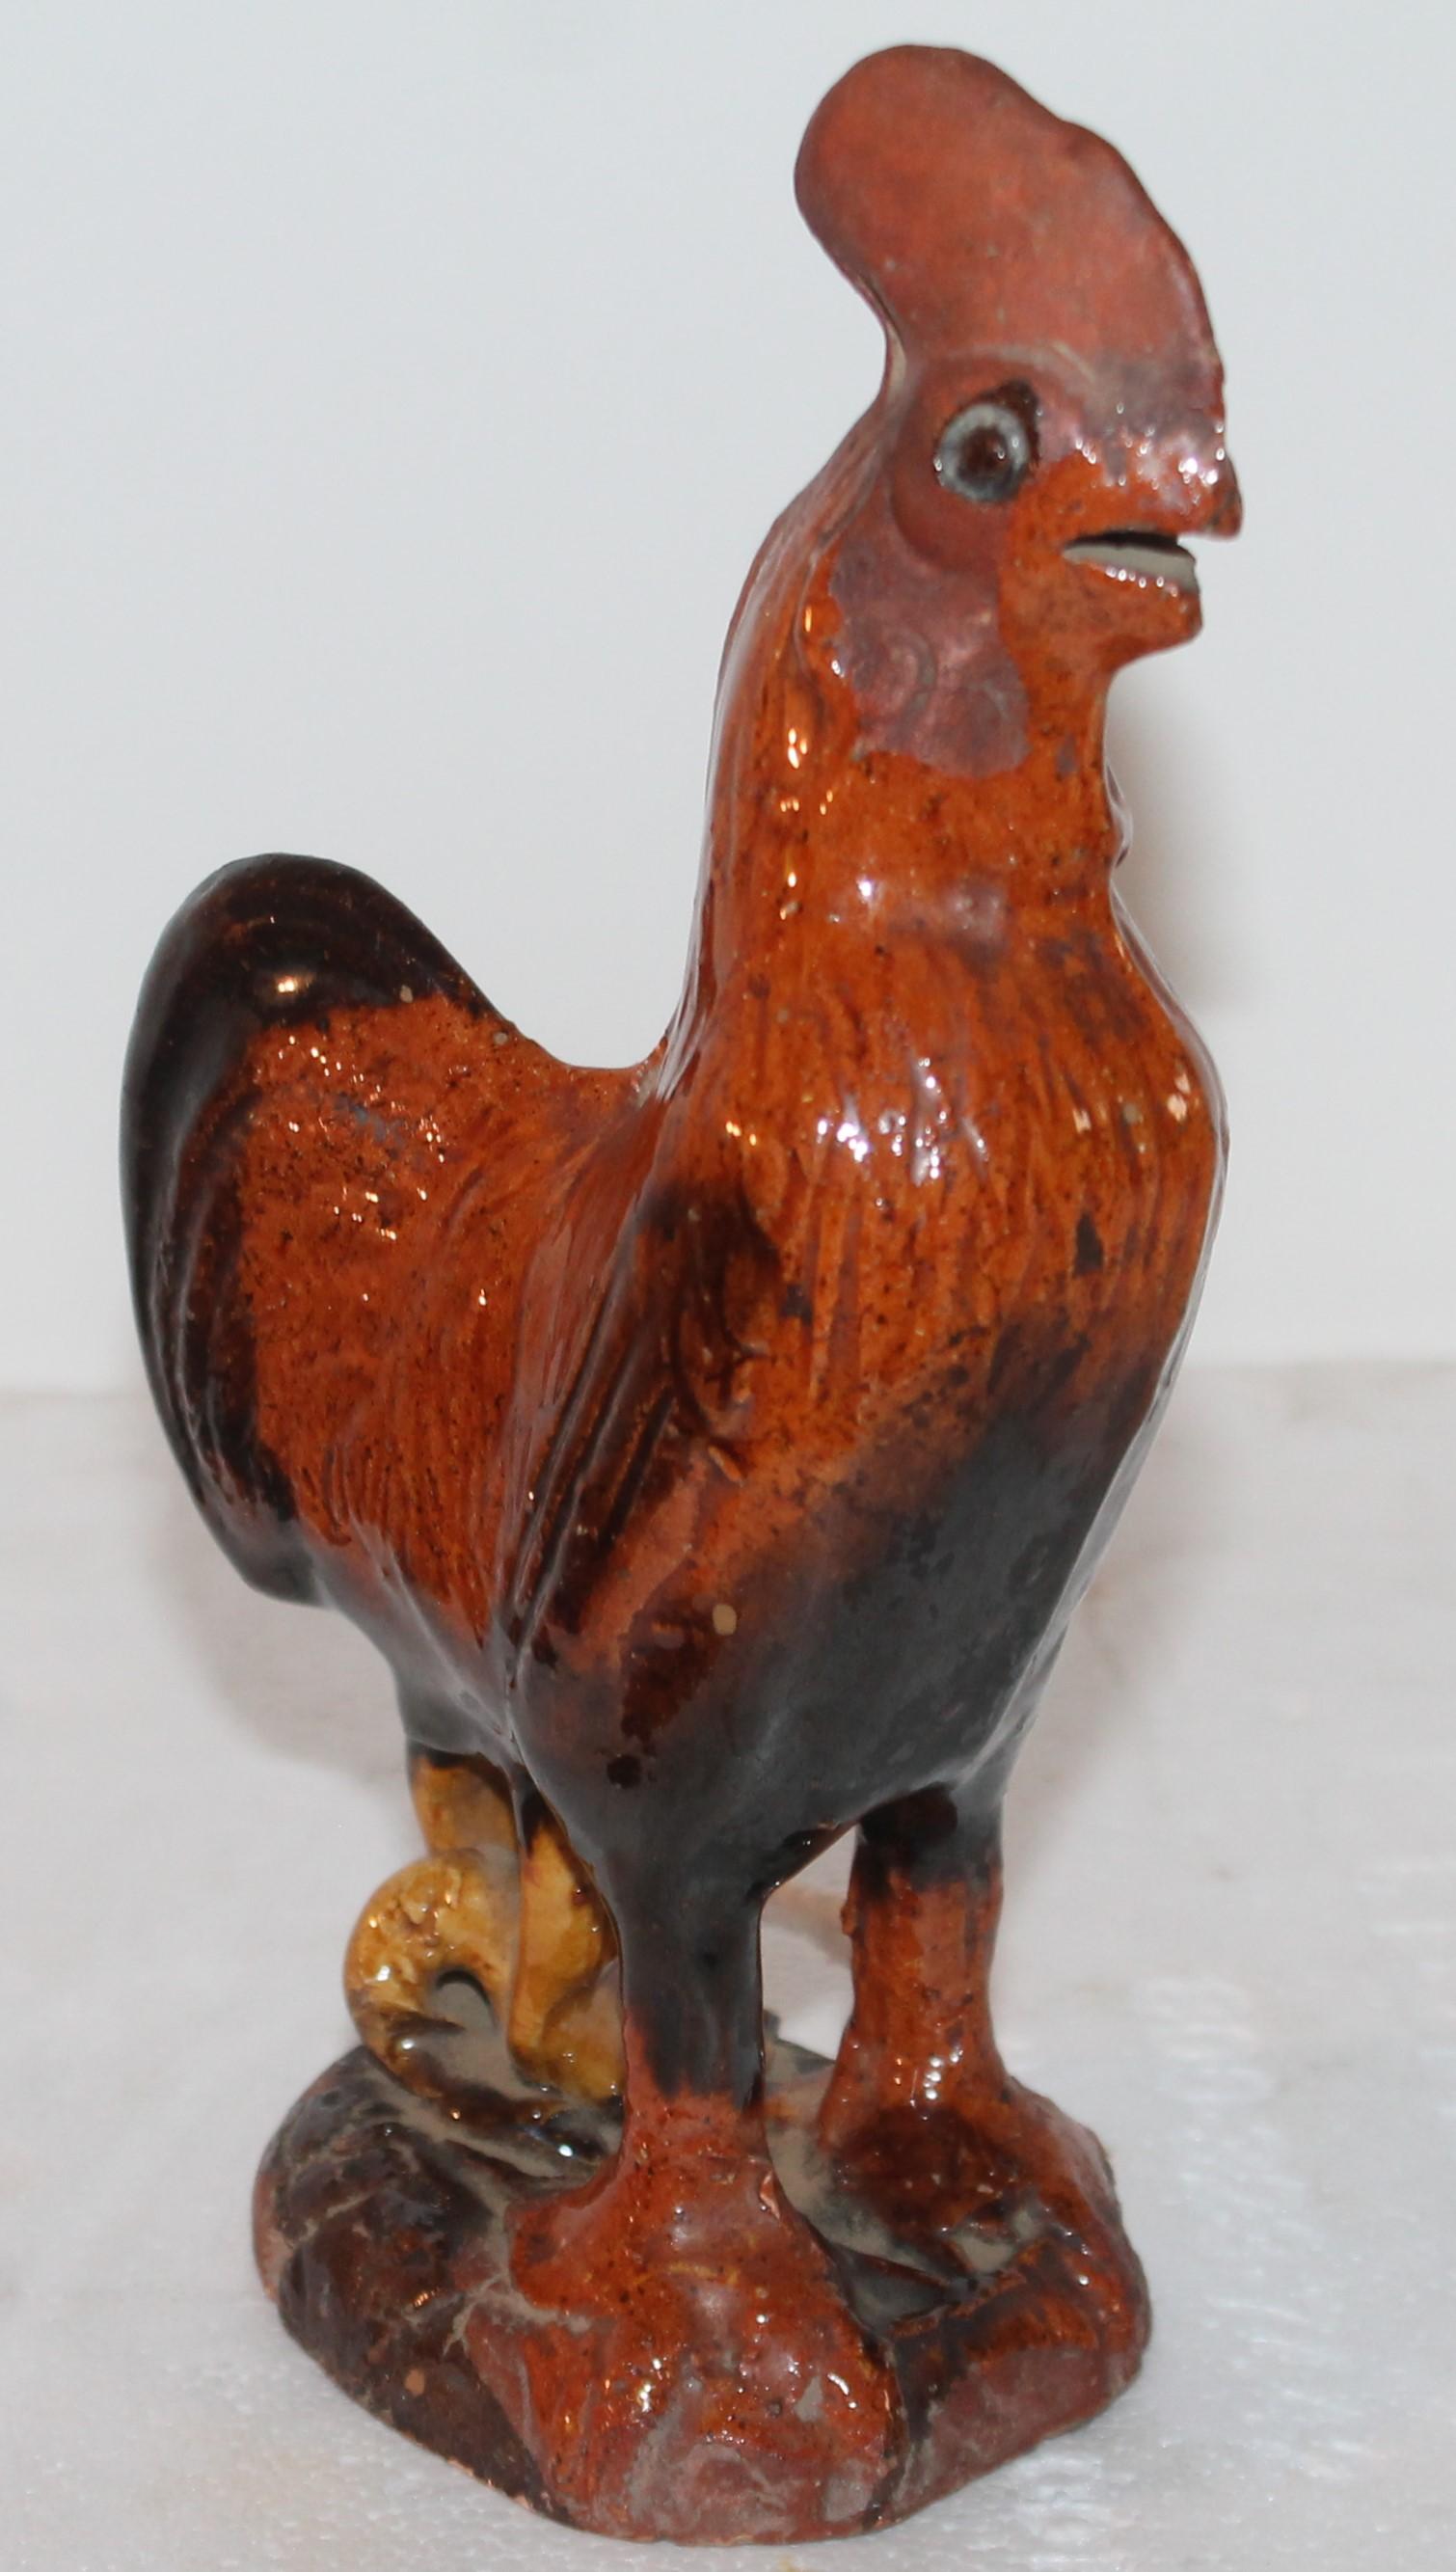 19th century Pennsylvania red ware pottery rooster found in Berks County, Pennsylvania. This rooster is in fine condition.